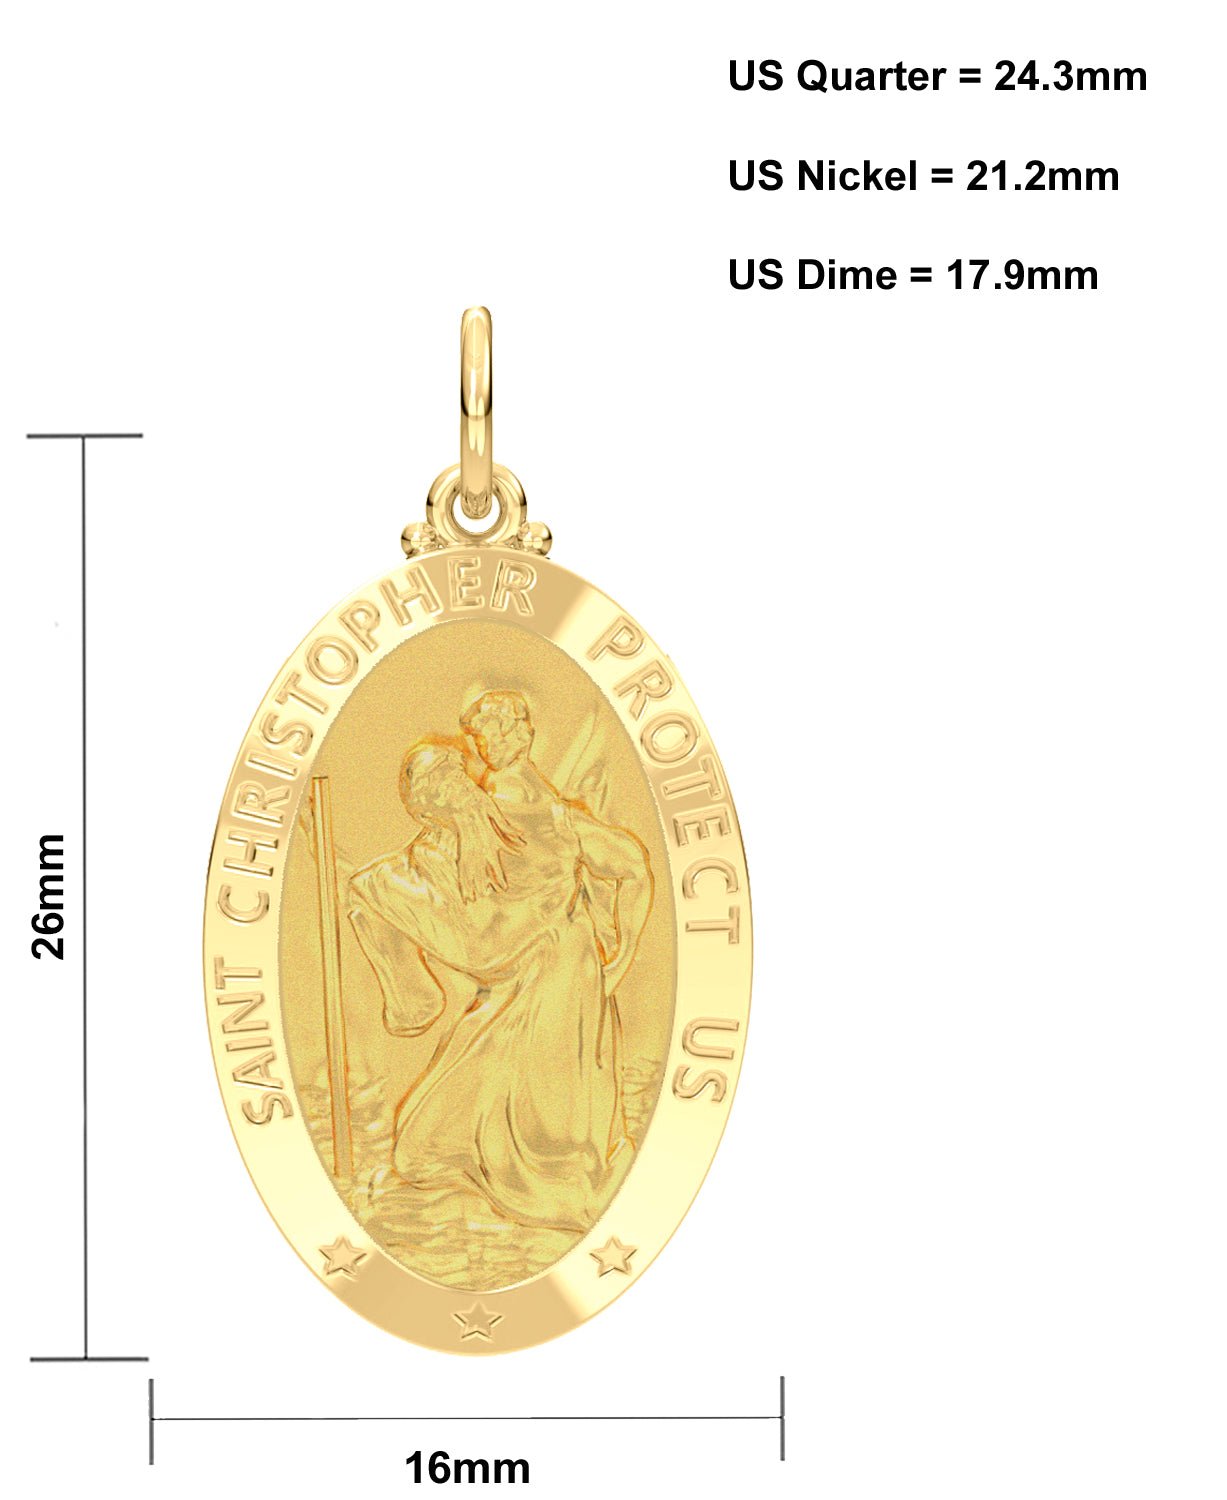 Ladies 14K Yellow Gold Saint Christopher Polished Finish Solid Pendant Necklace, 26mm - US Jewels